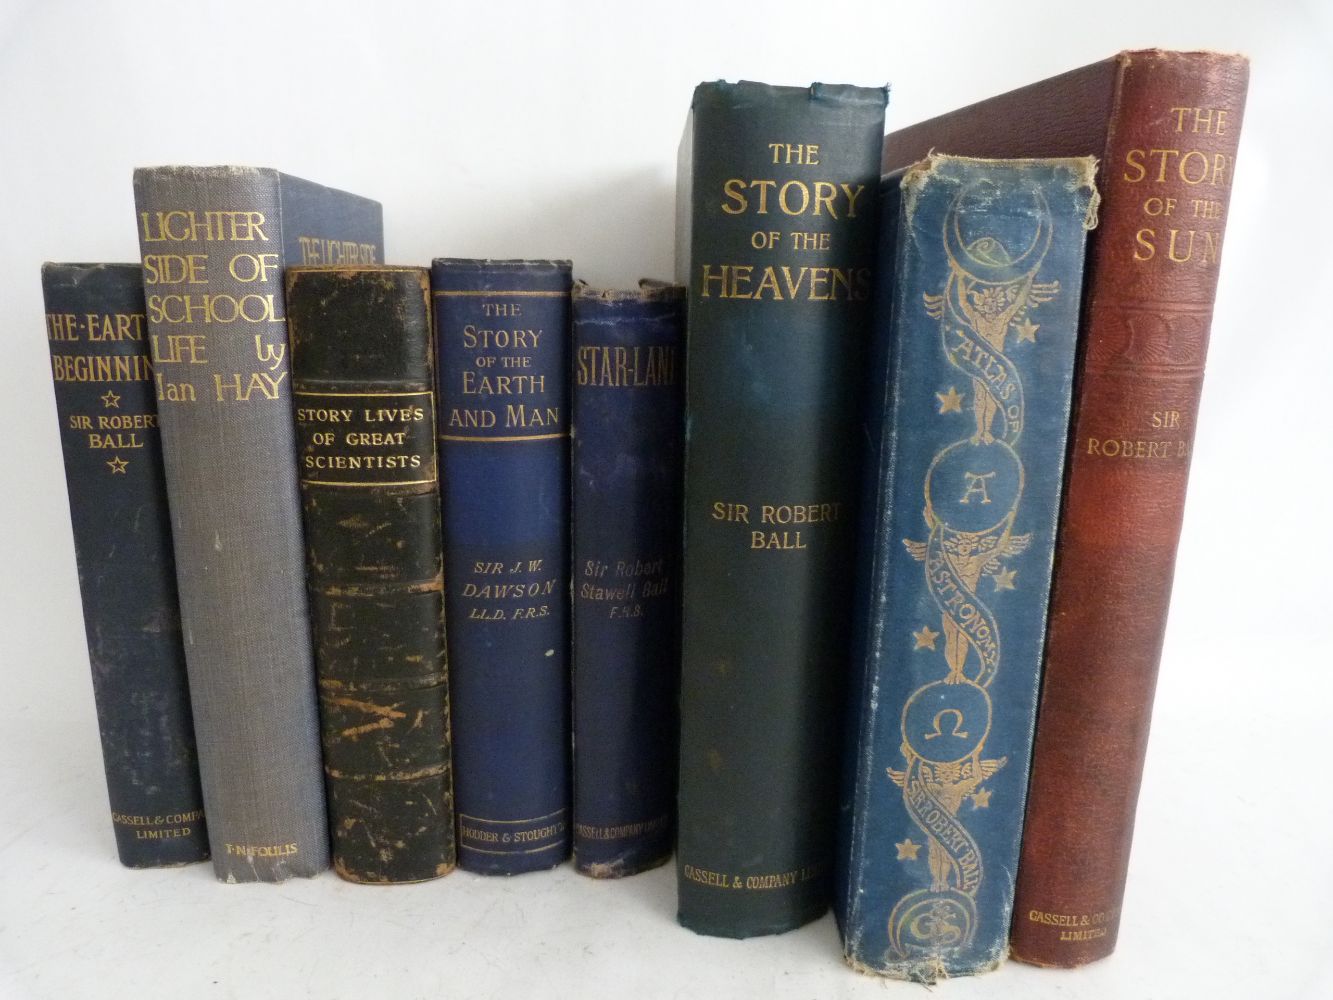 CARLISLE. 301 lots of Antiquarian & Collectable Books & Related Items including Postcards